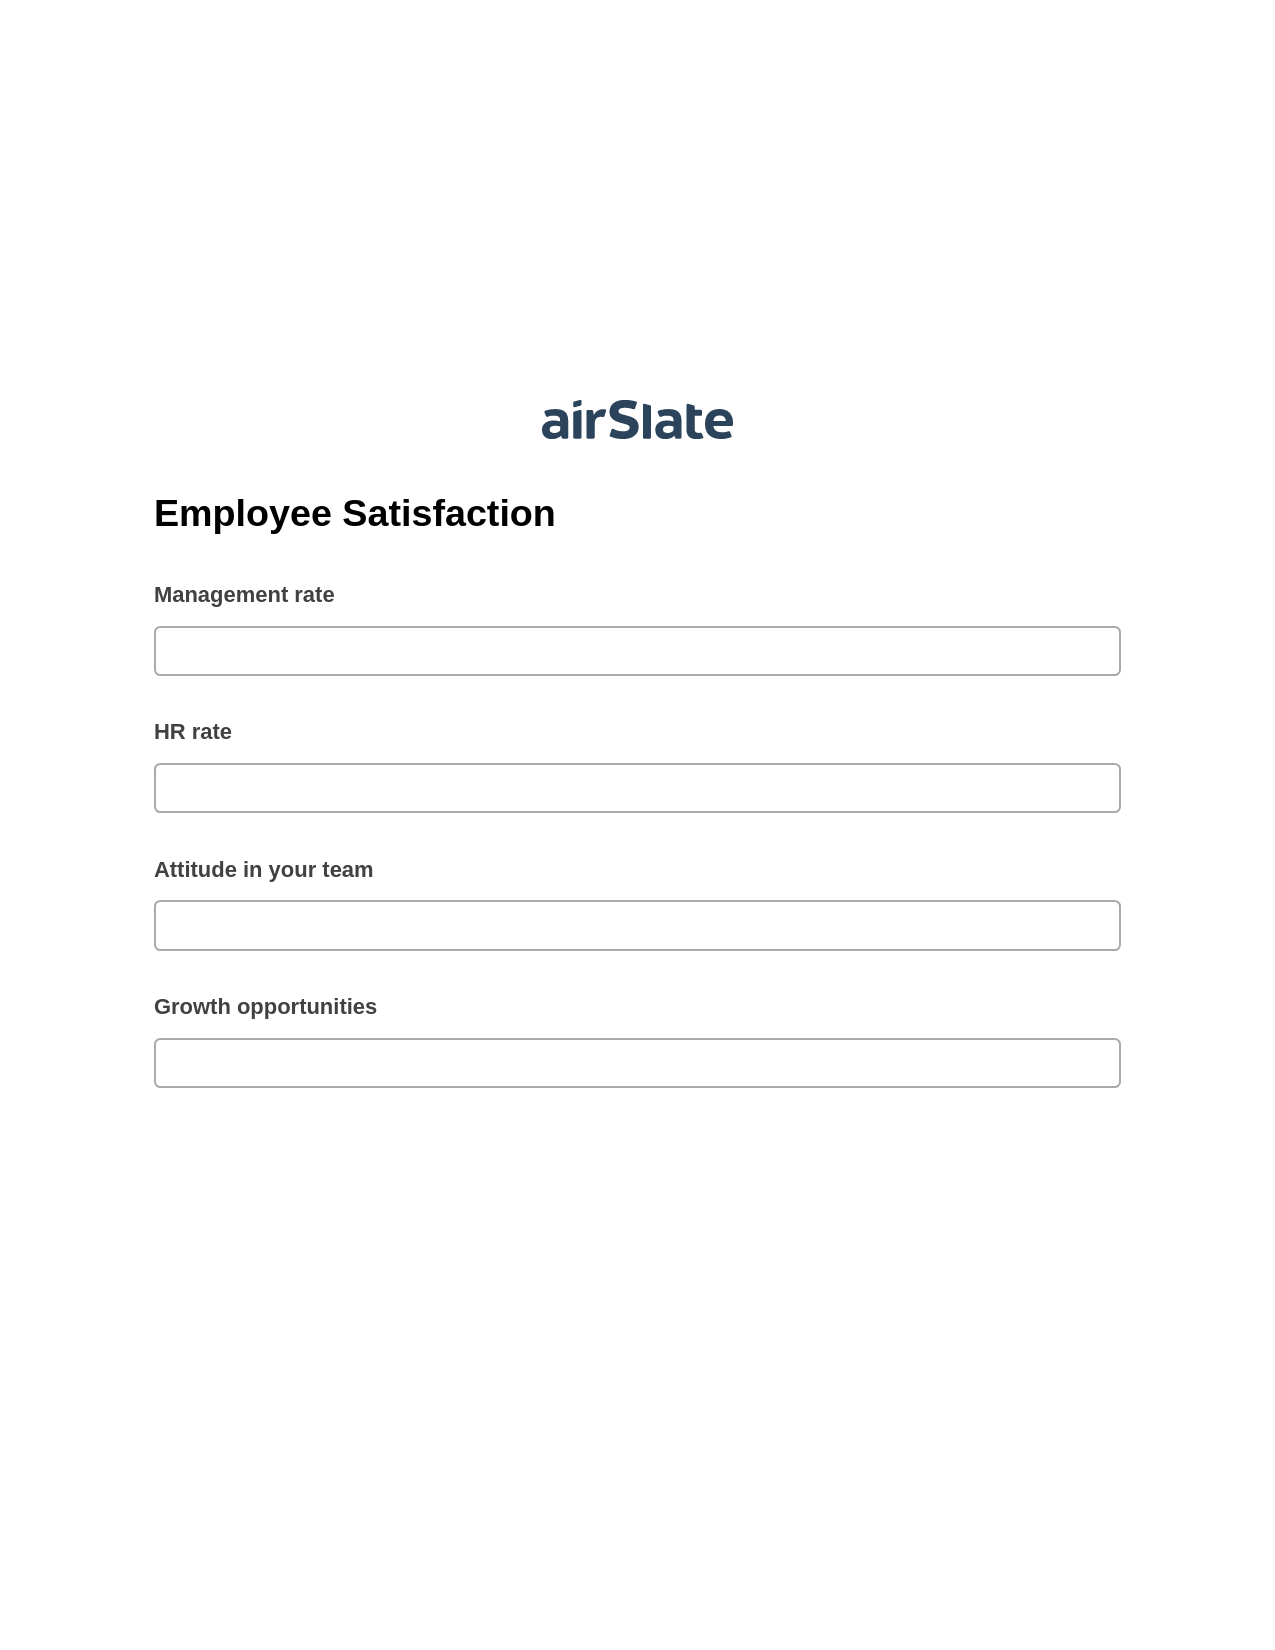 Employee Satisfaction Pre-fill from Google Sheets Bot, Email Notification Bot, Archive to SharePoint Folder Bot